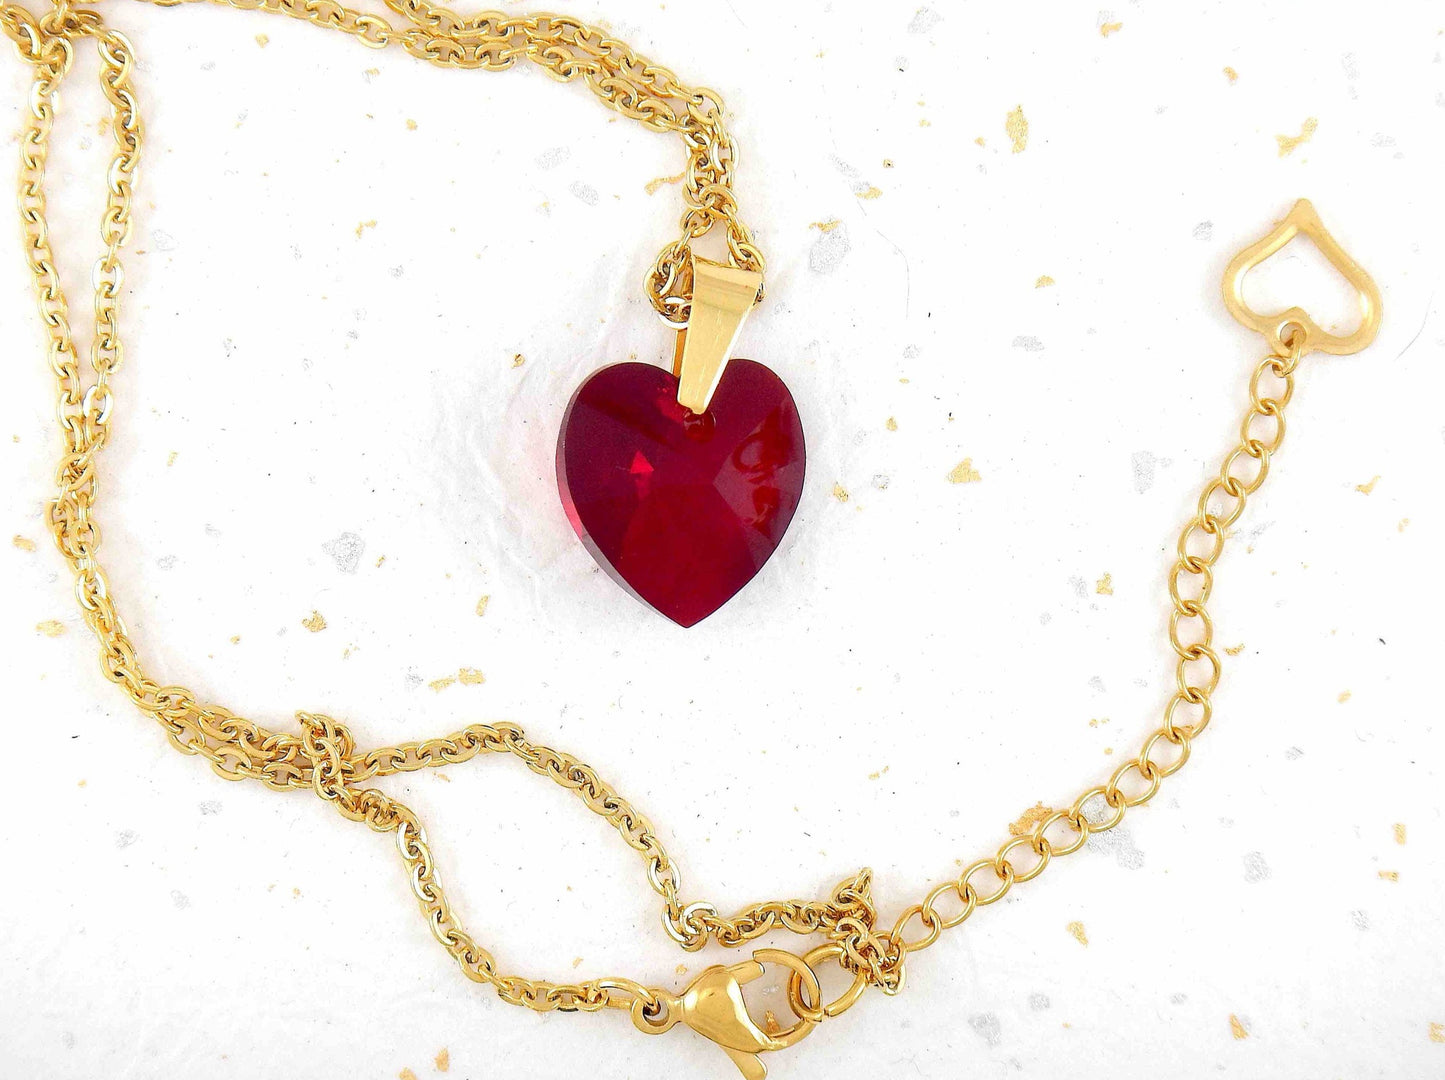 16-inch necklace with 20mm deep red faceted crystal heart pendant, regular or gold-toned stainless steel chain